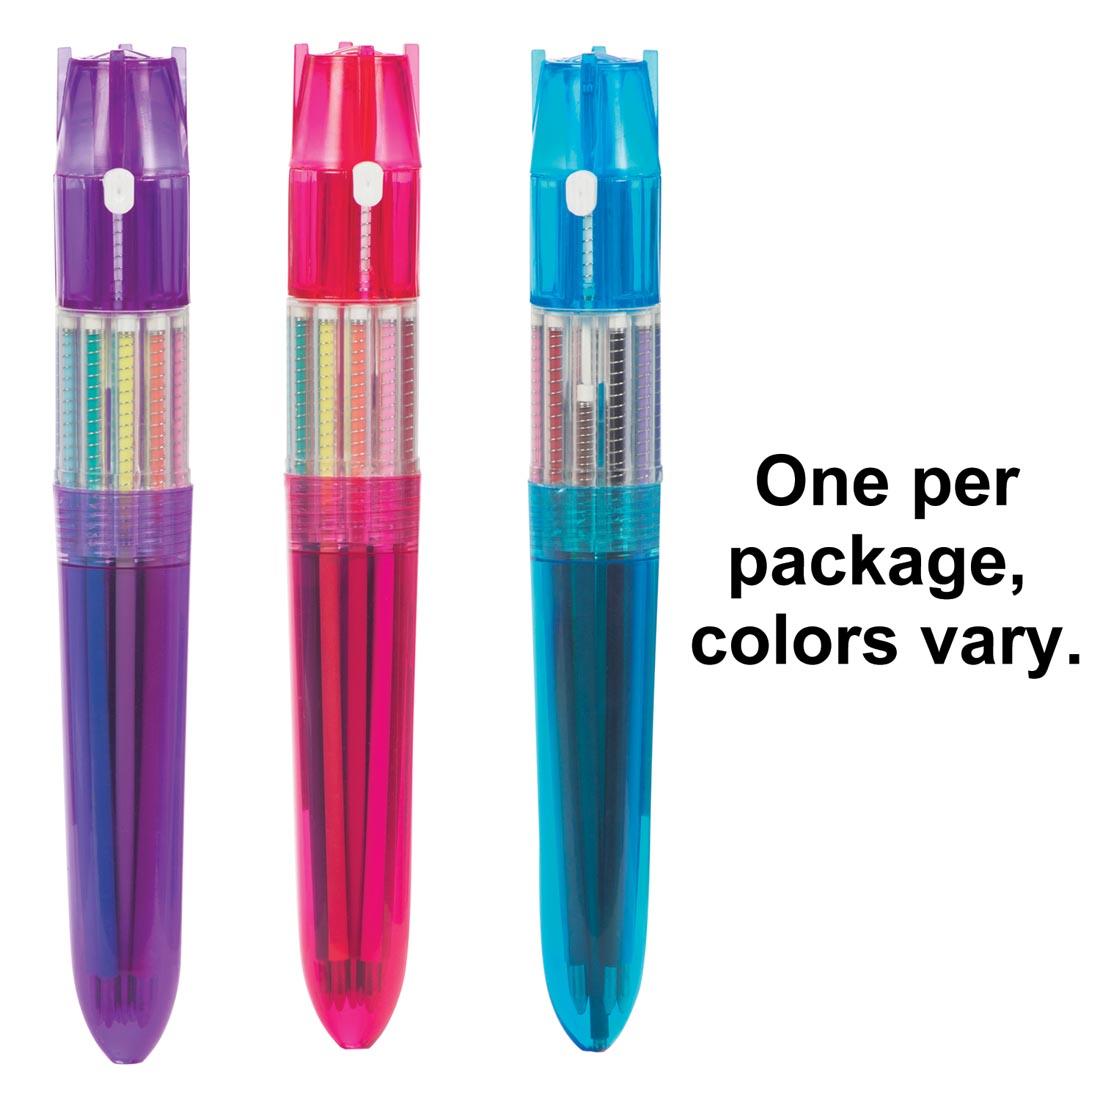 Three different Colorclik Pens with the text One per package, colors vary.